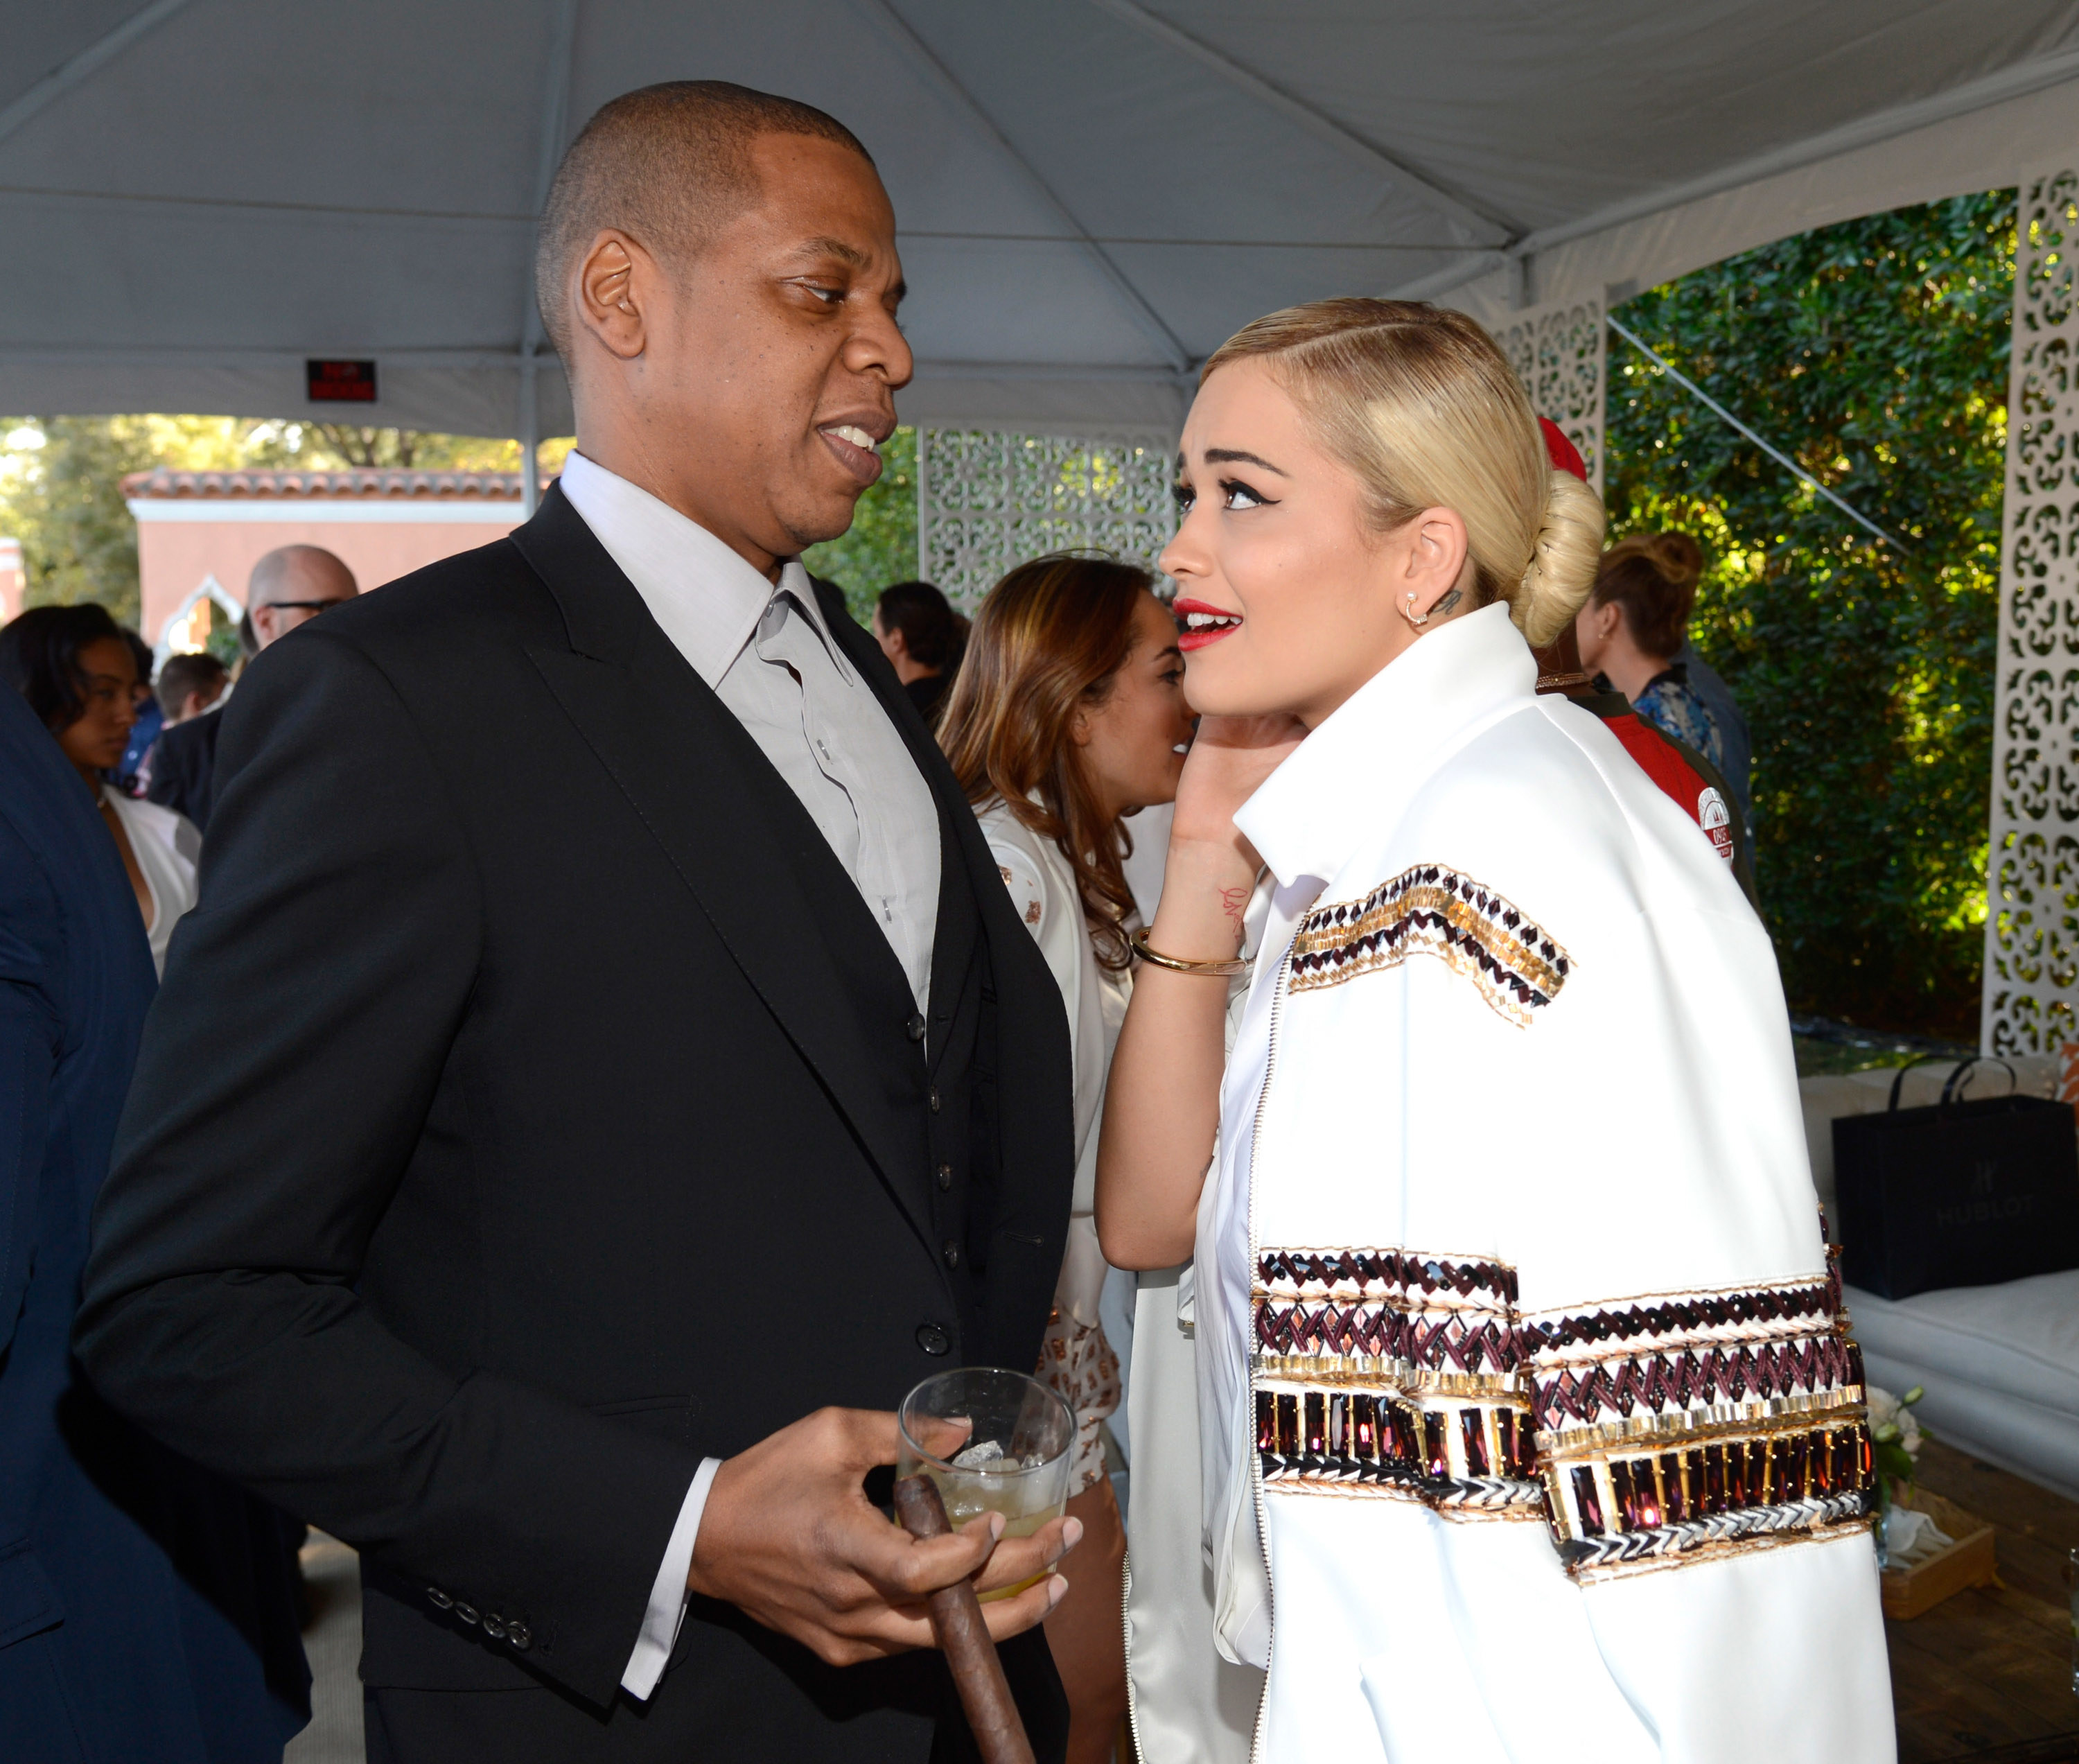 Jay-Z and Rita looking at each other